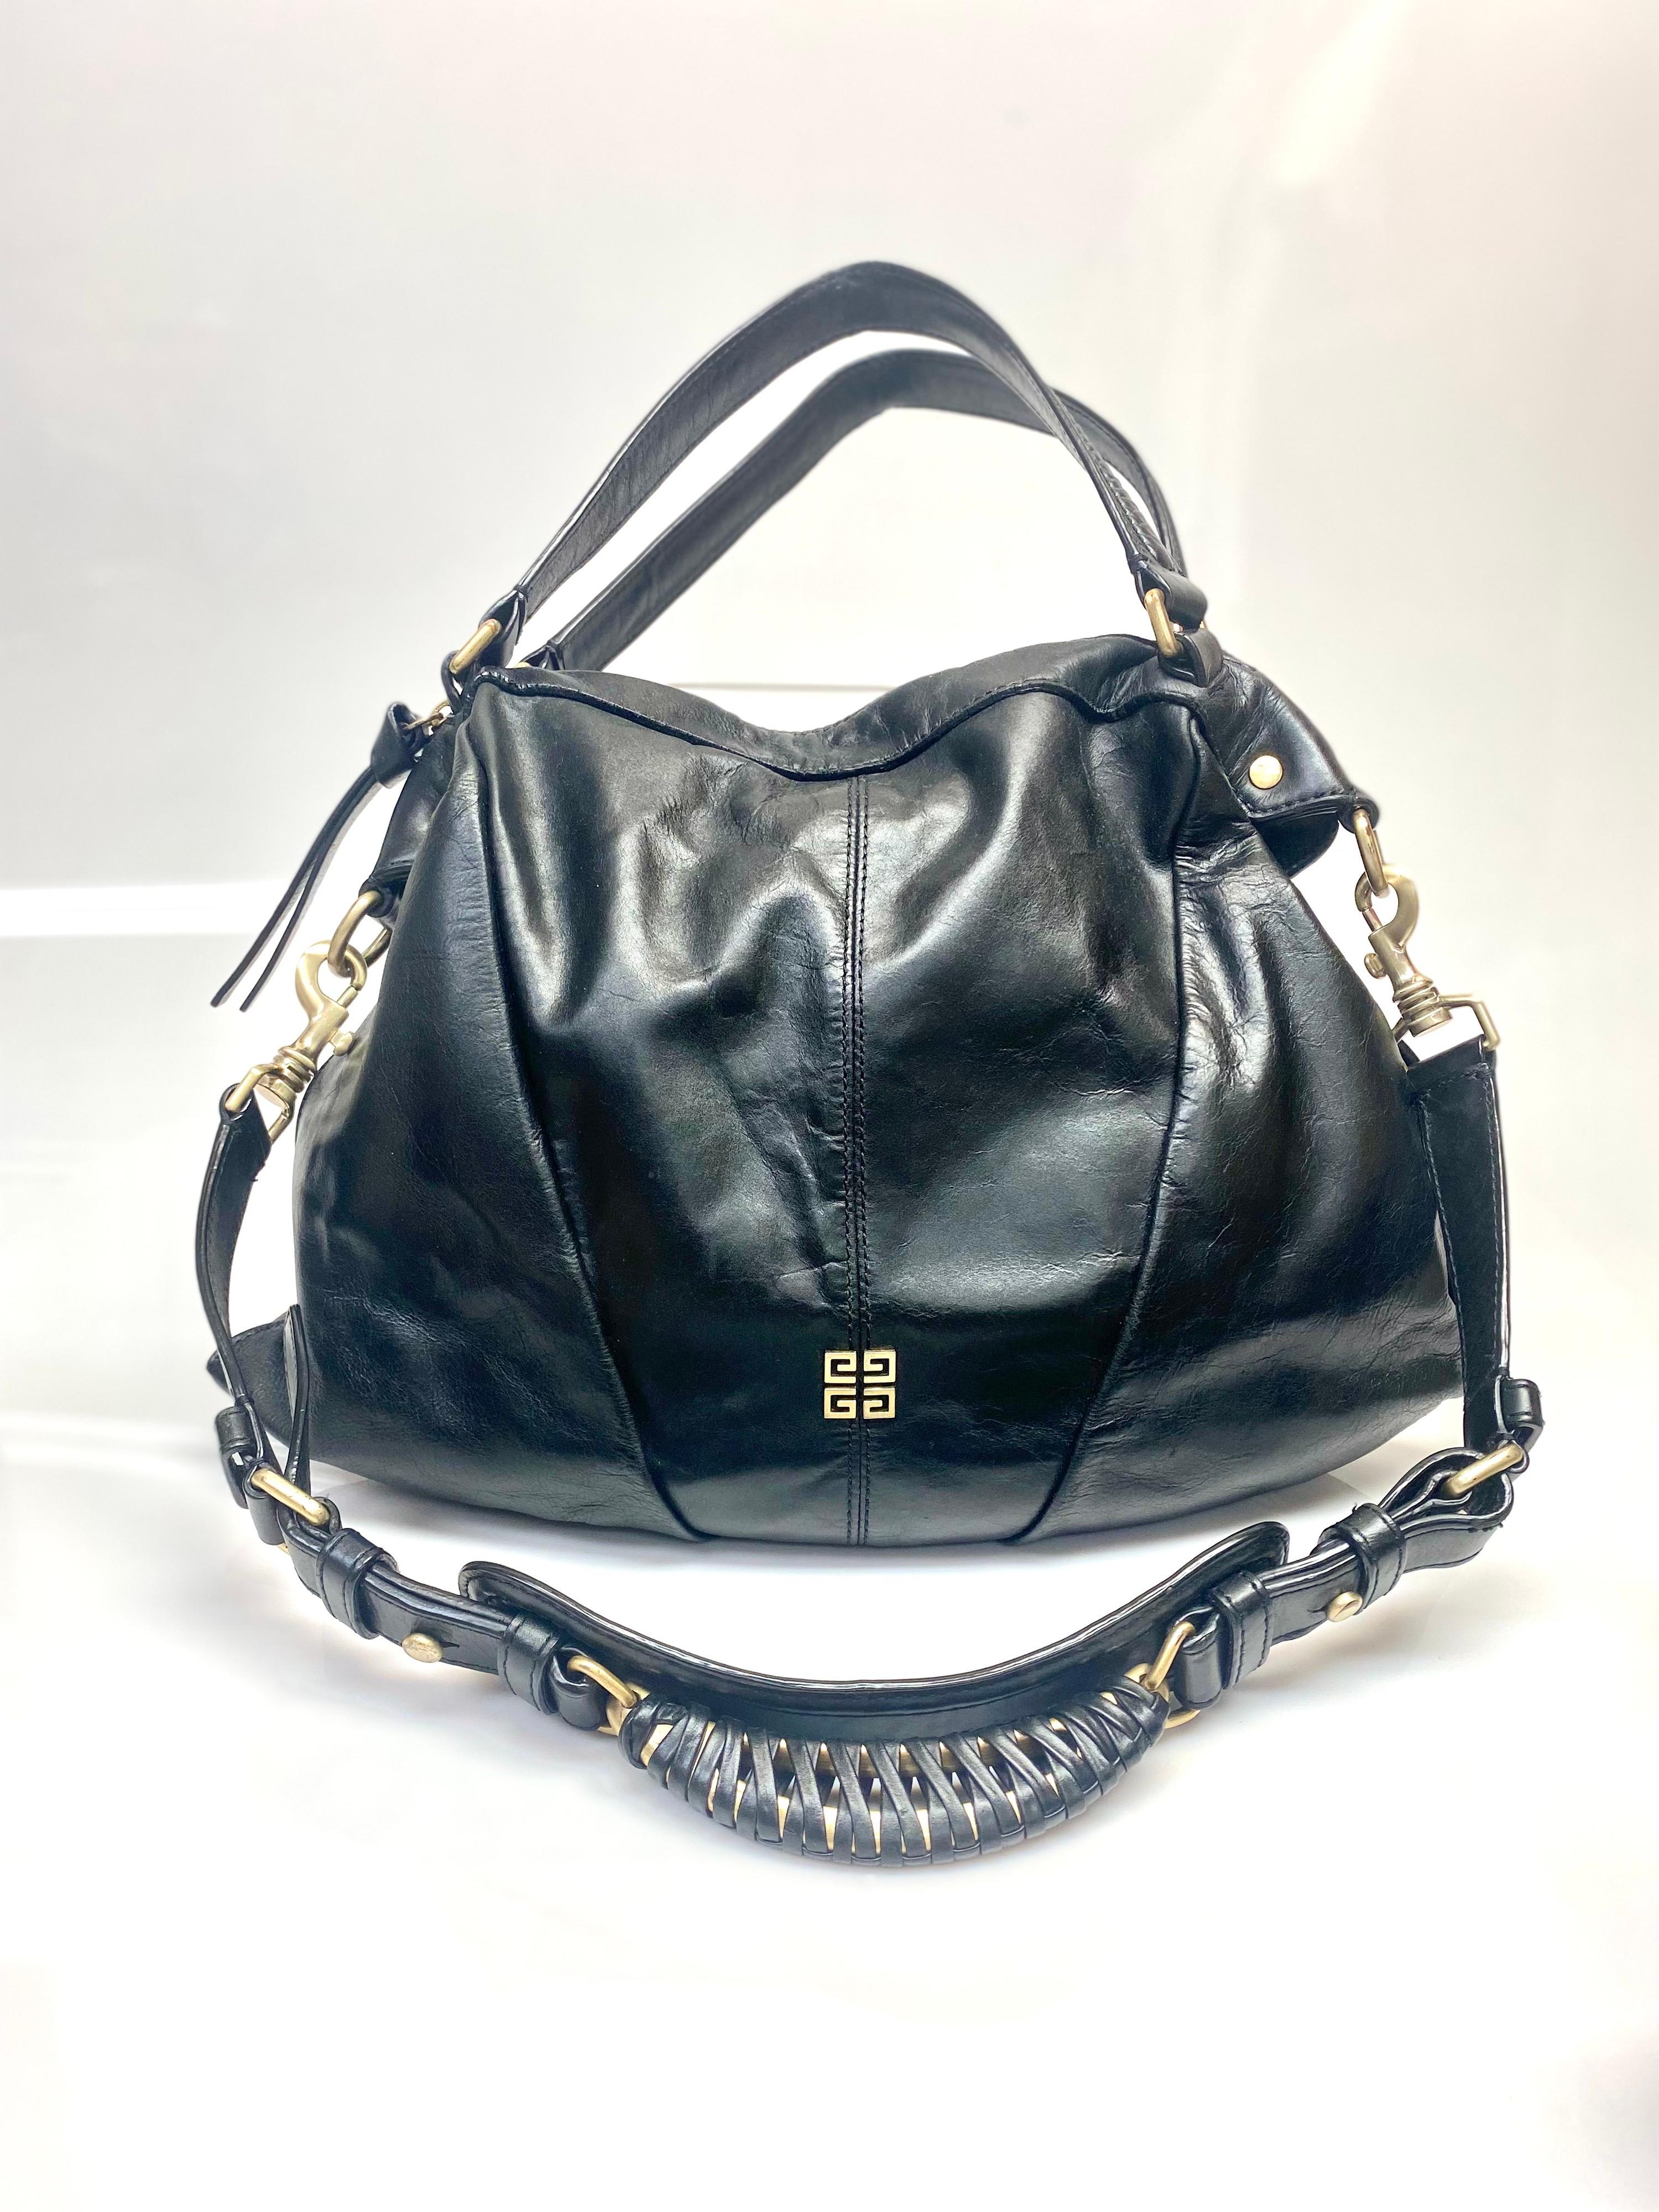 Givenchy Black Leather Shoulder Handbag-GHW In Excellent Condition For Sale In West Palm Beach, FL